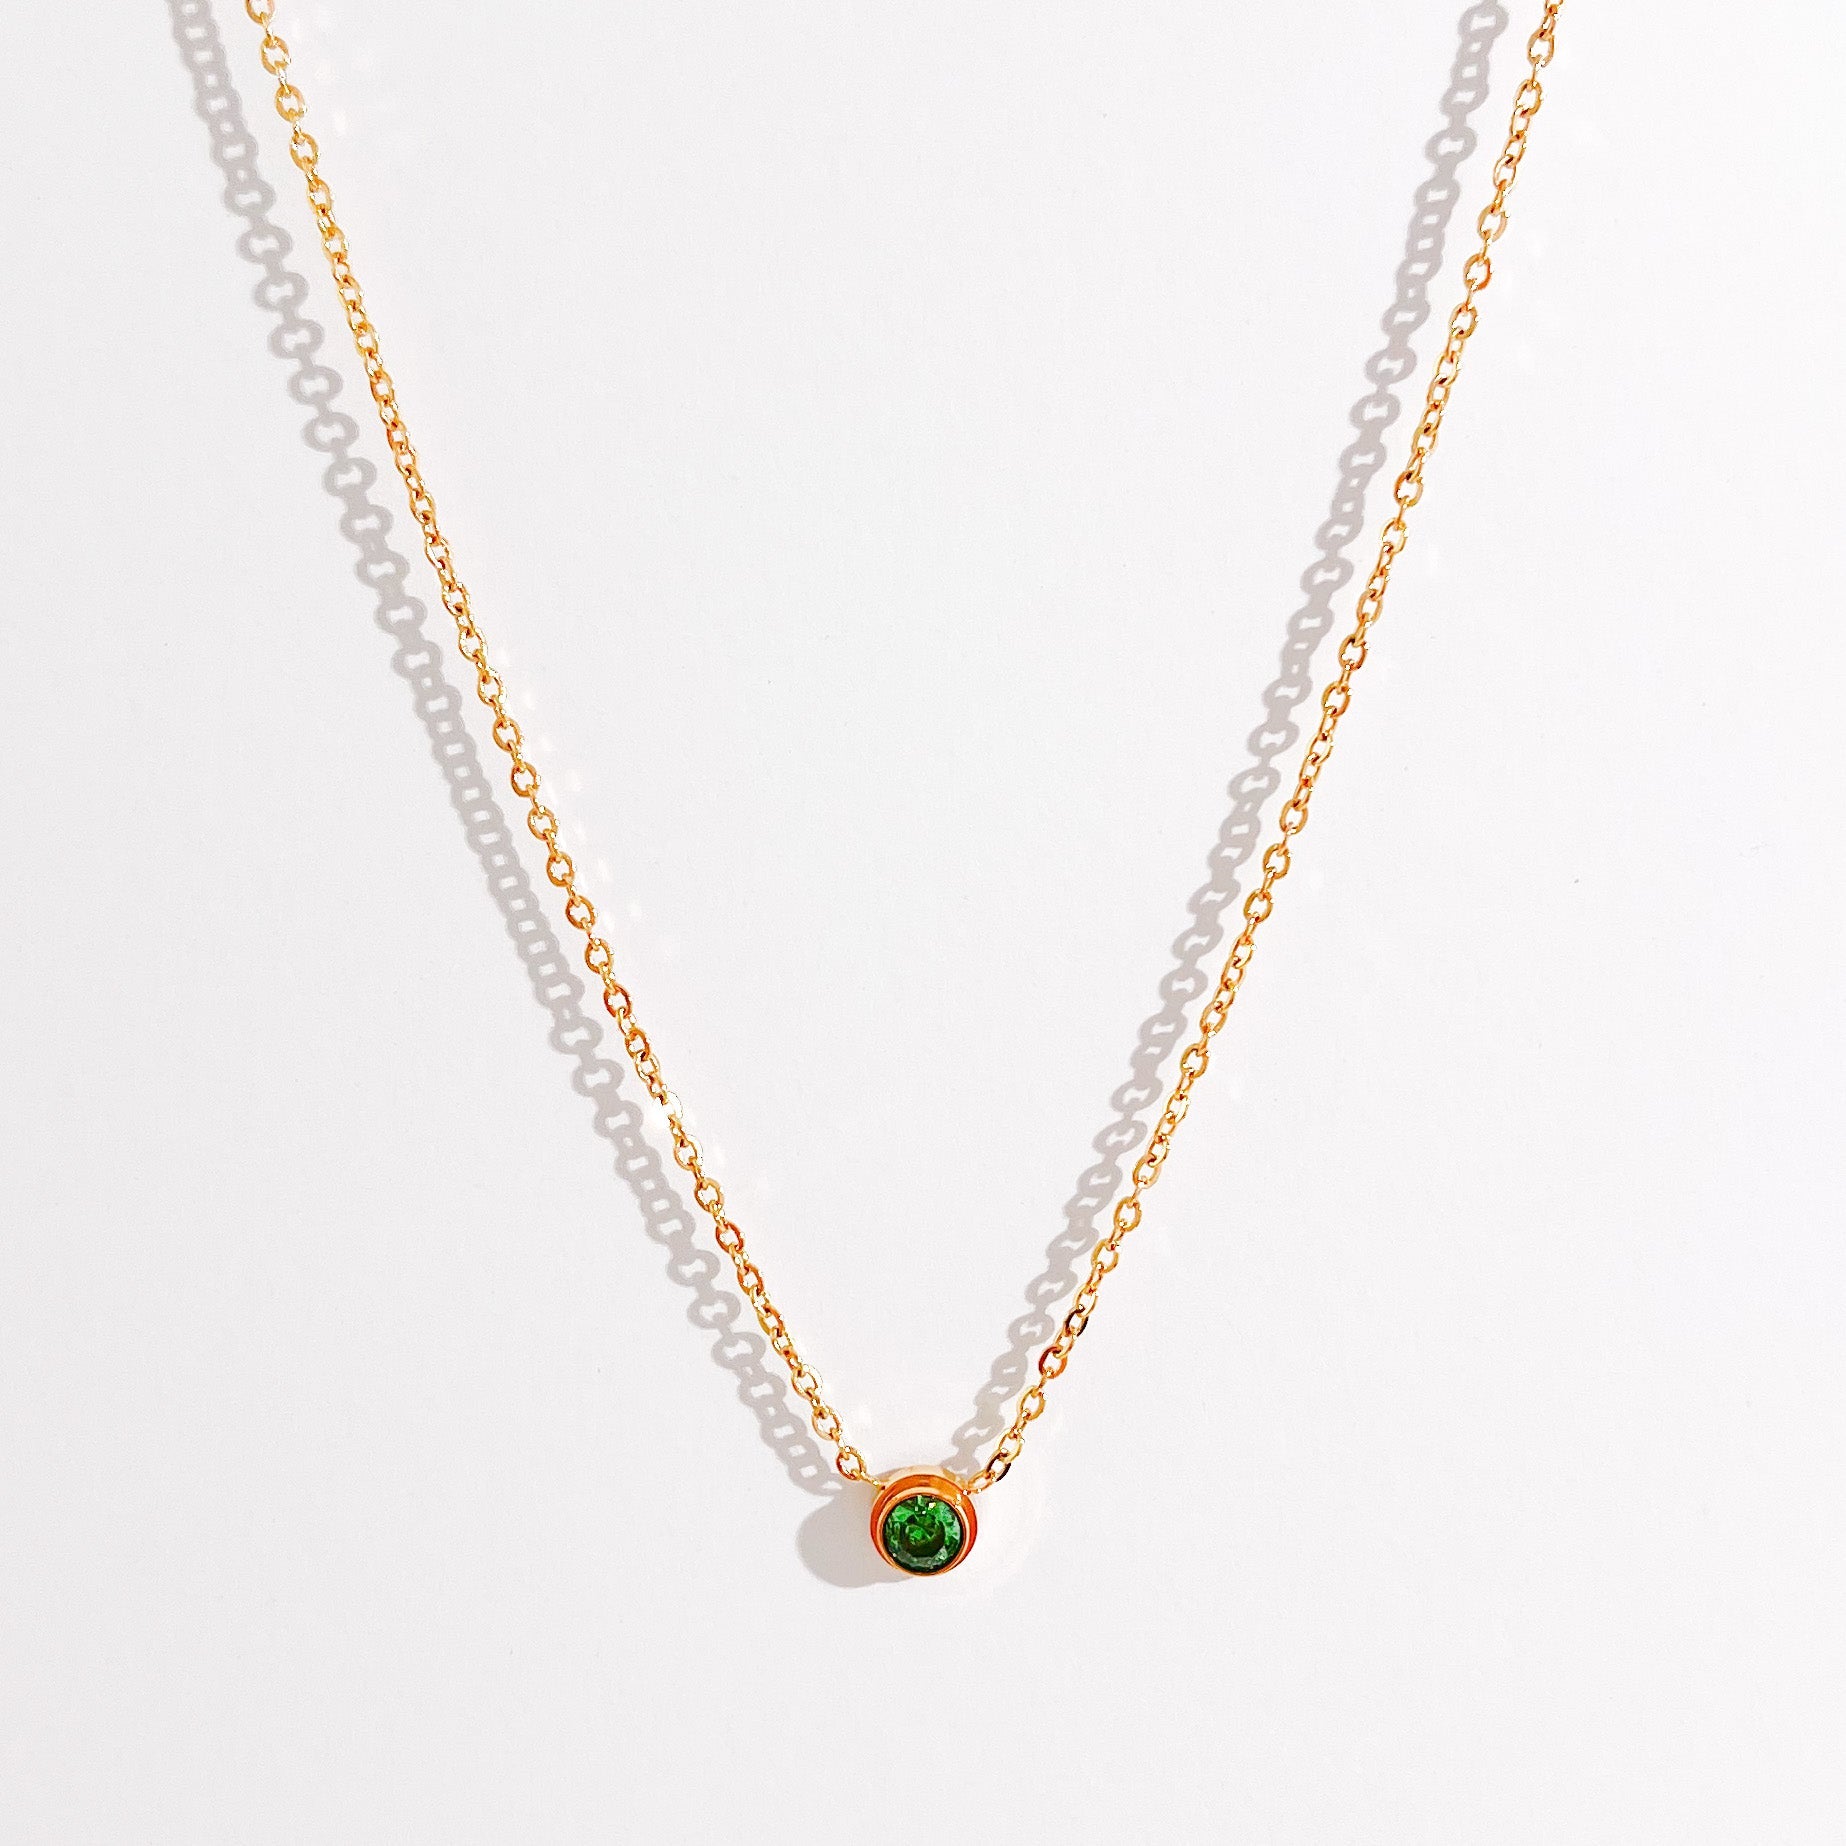 Green Single Gem Necklace in Gold - Flaire & Co.